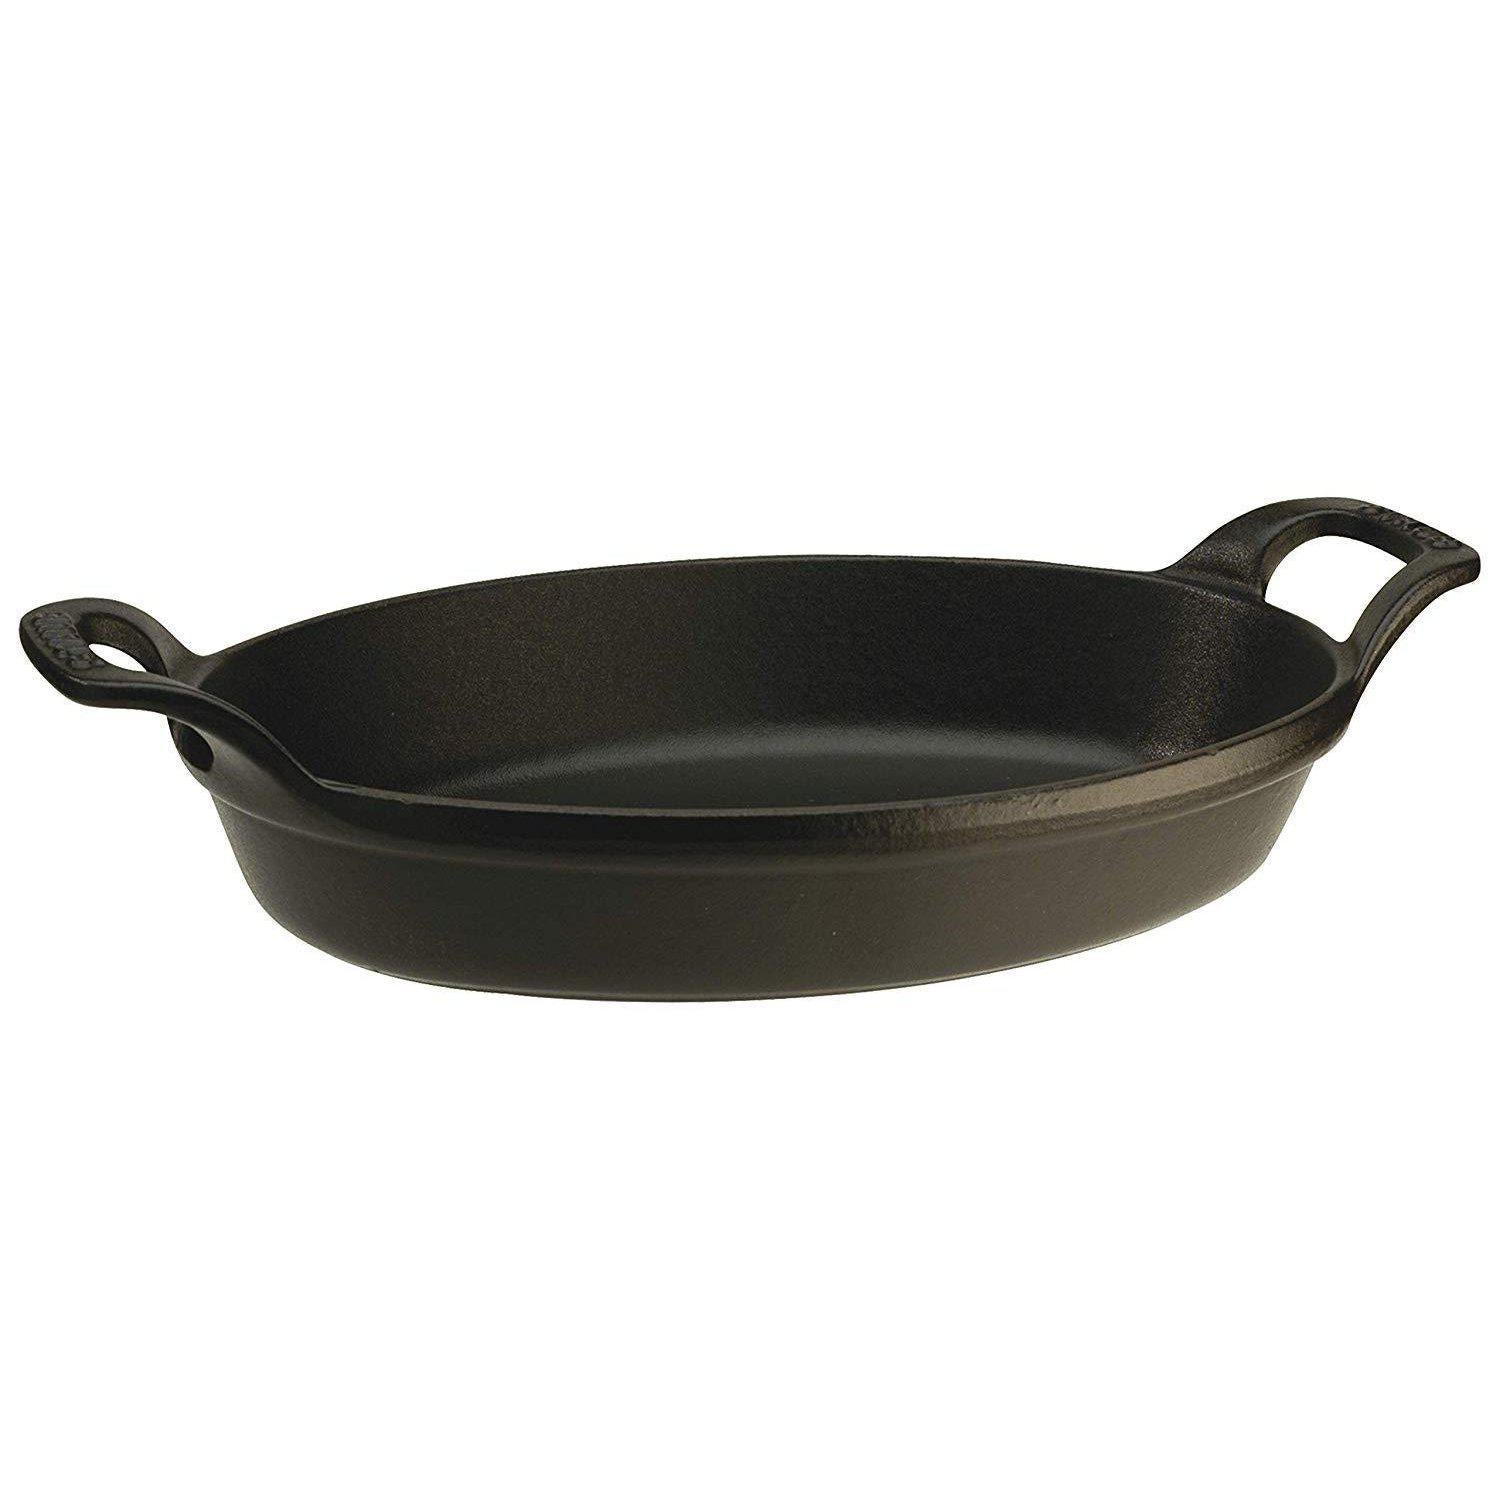 Staub - 2.2 L Oval Stackable Dish (32 cm) -40509-342